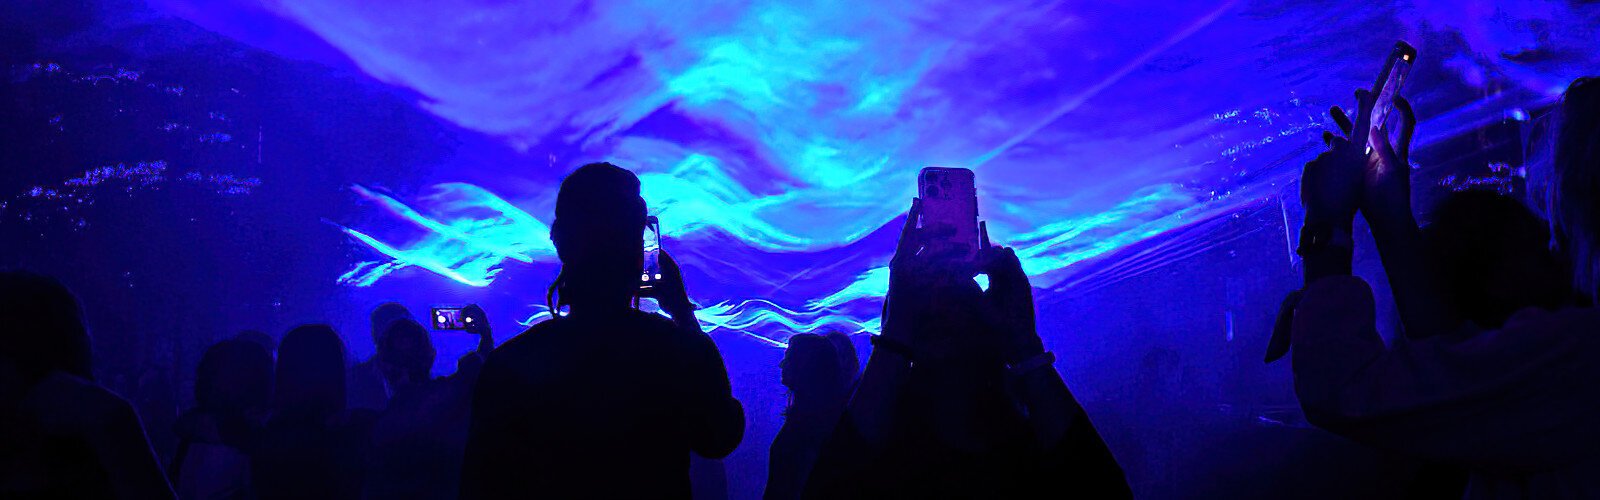 he blue moving waves of WATERLICHT were captured on cell phones more than once by fascinated spectators during the three-night event.